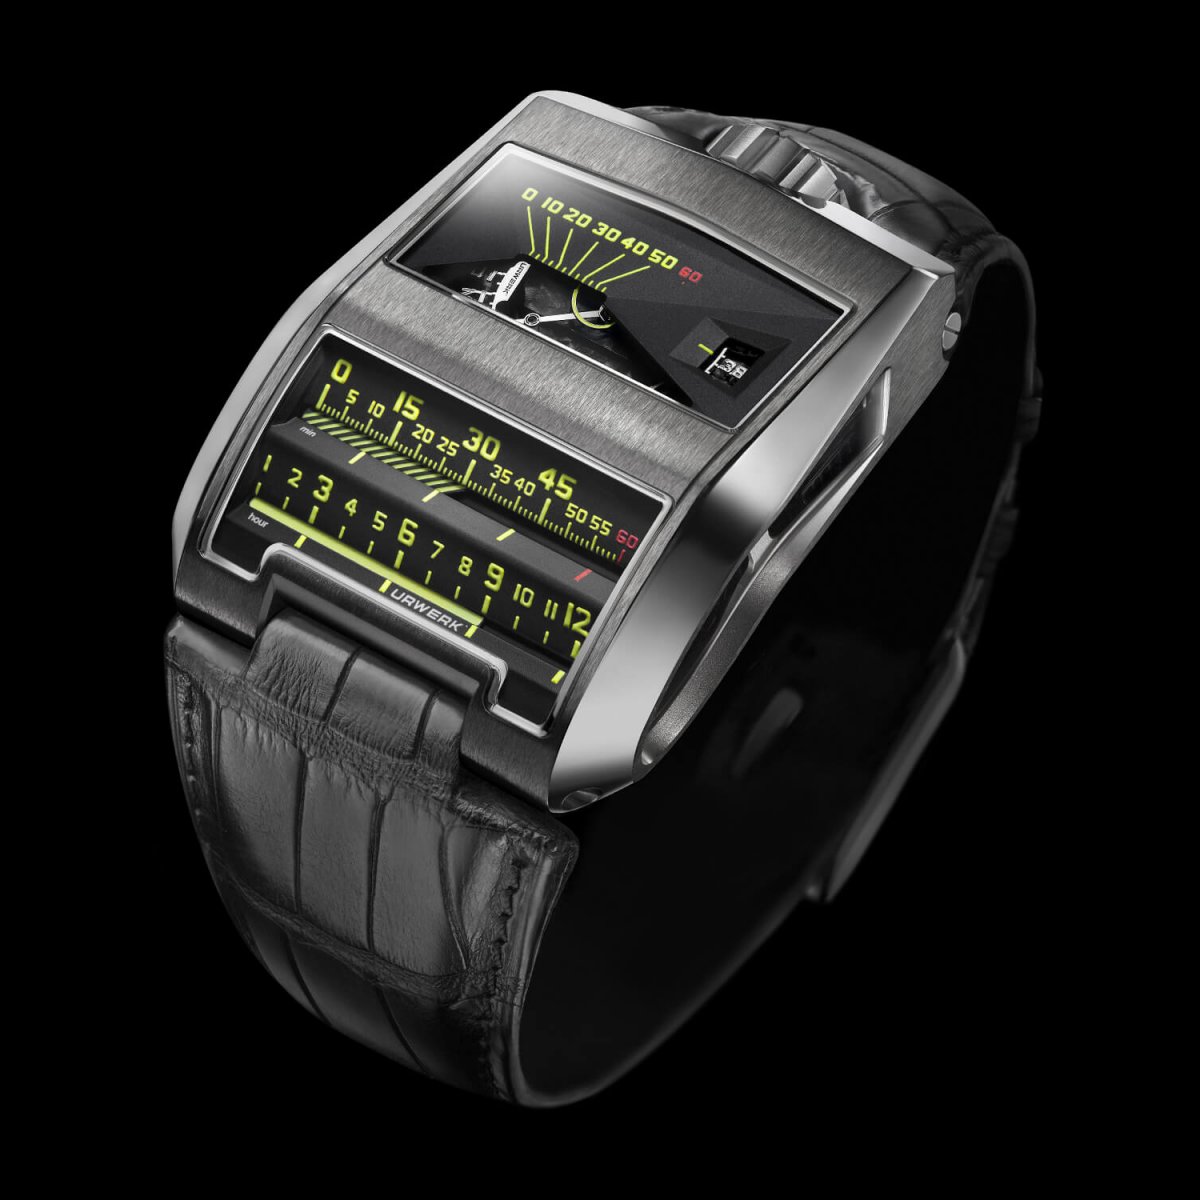 Swiss timepieces special-project watch UR-CC1